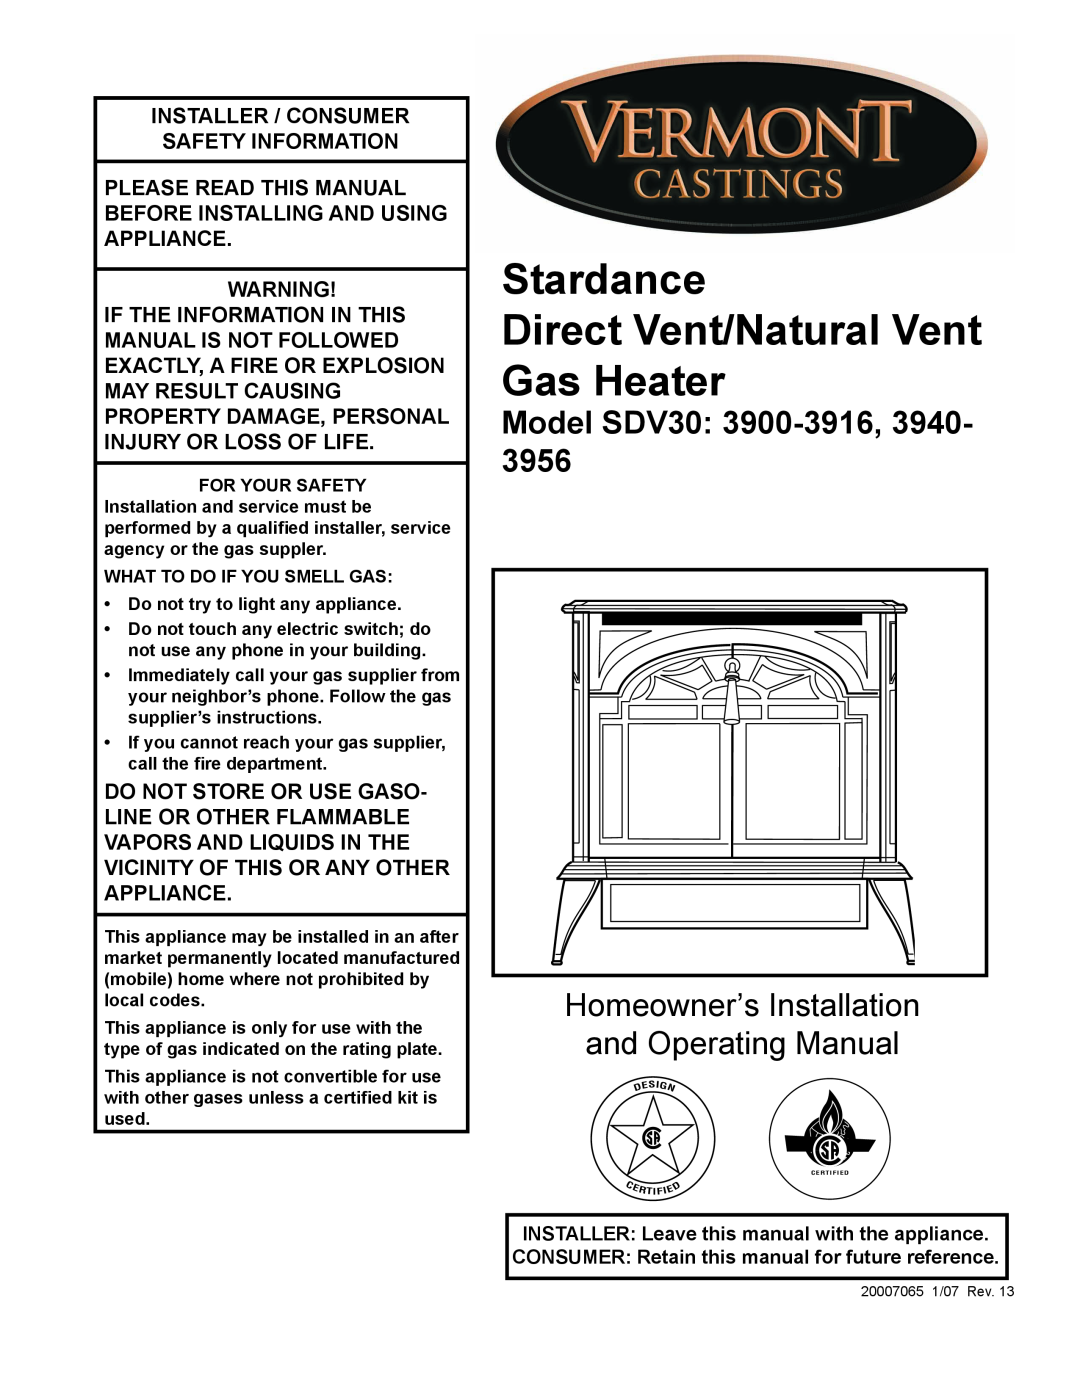 Vermont Casting manual Model SDV30 3900-3916,3940, Stardance Direct Vent/Natural Vent Gas Heater 